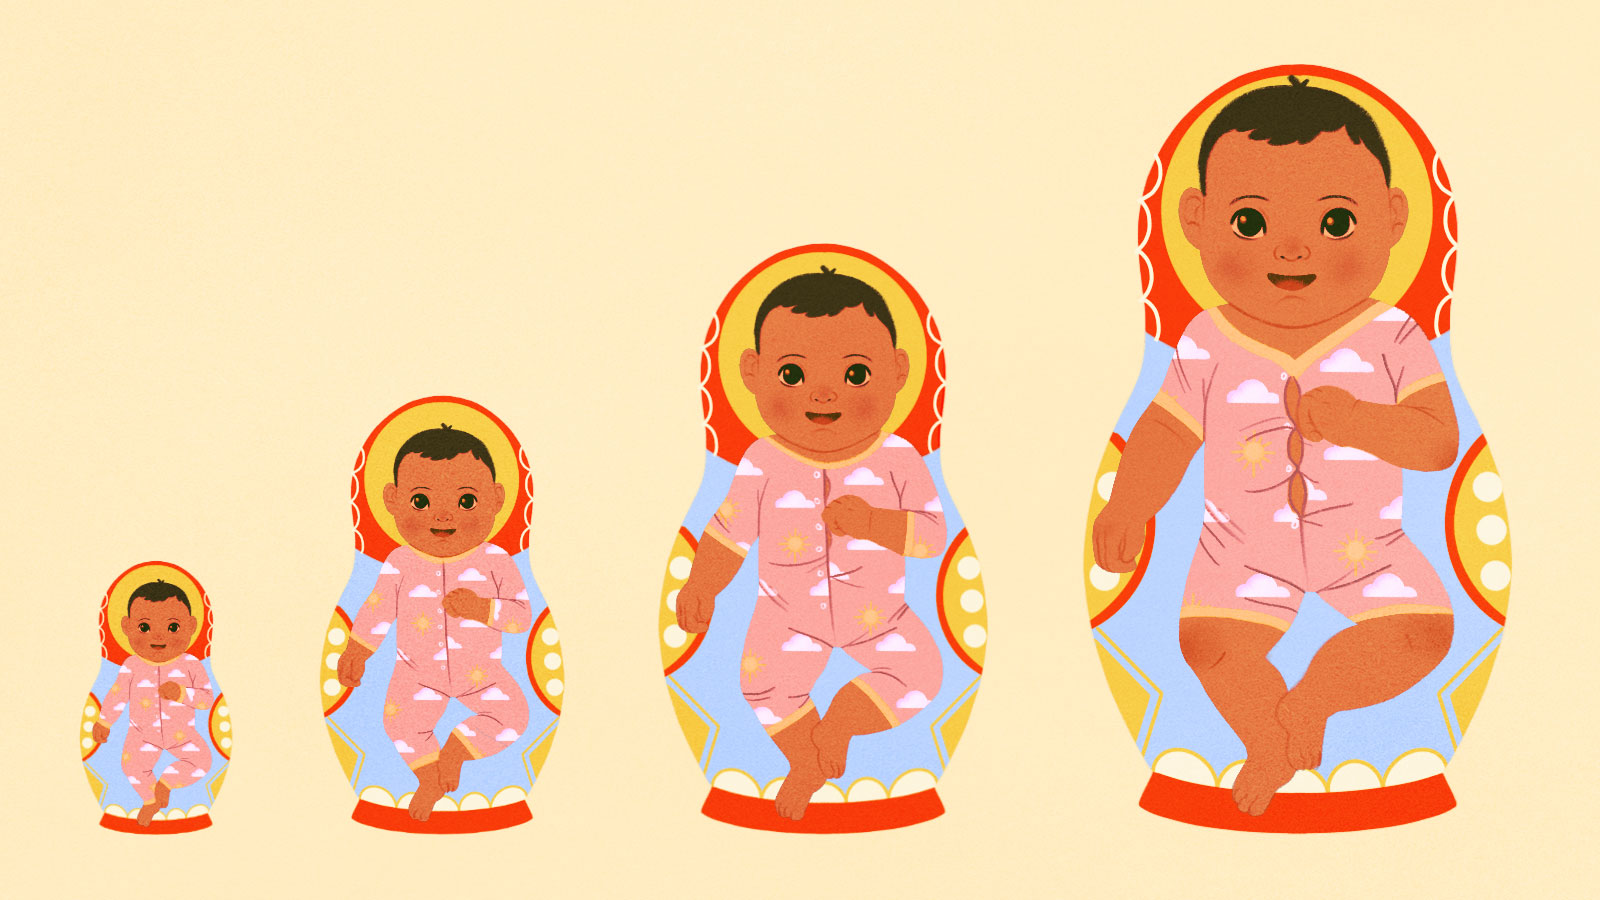 illustration of nesting dolls with babies painted on them wearing the same onesie that gets progressively smaller